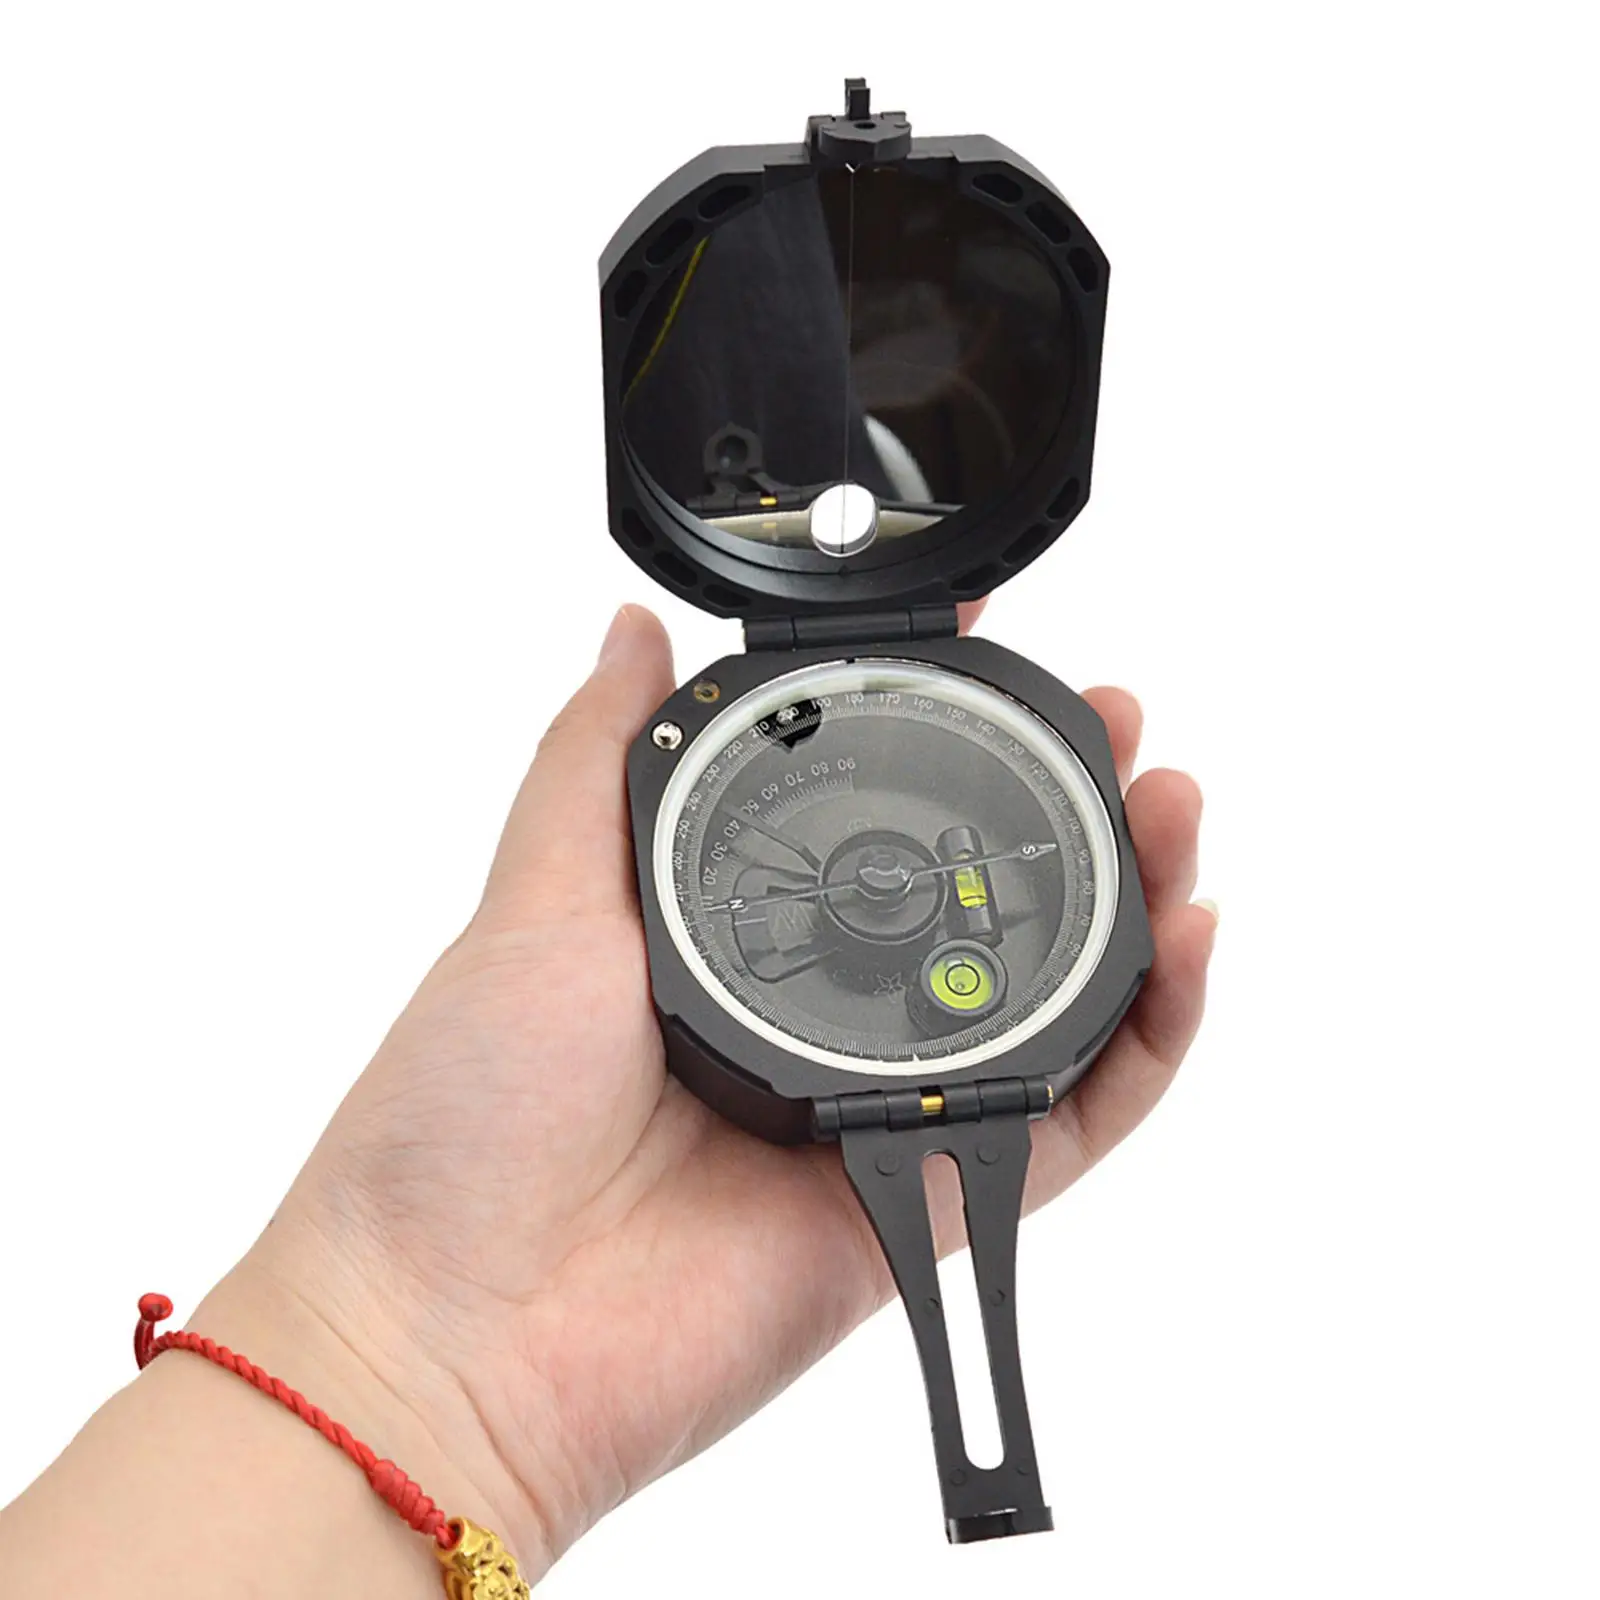 Multifunction Camping Compass with Pouch Survival Geology Hunting Pocket